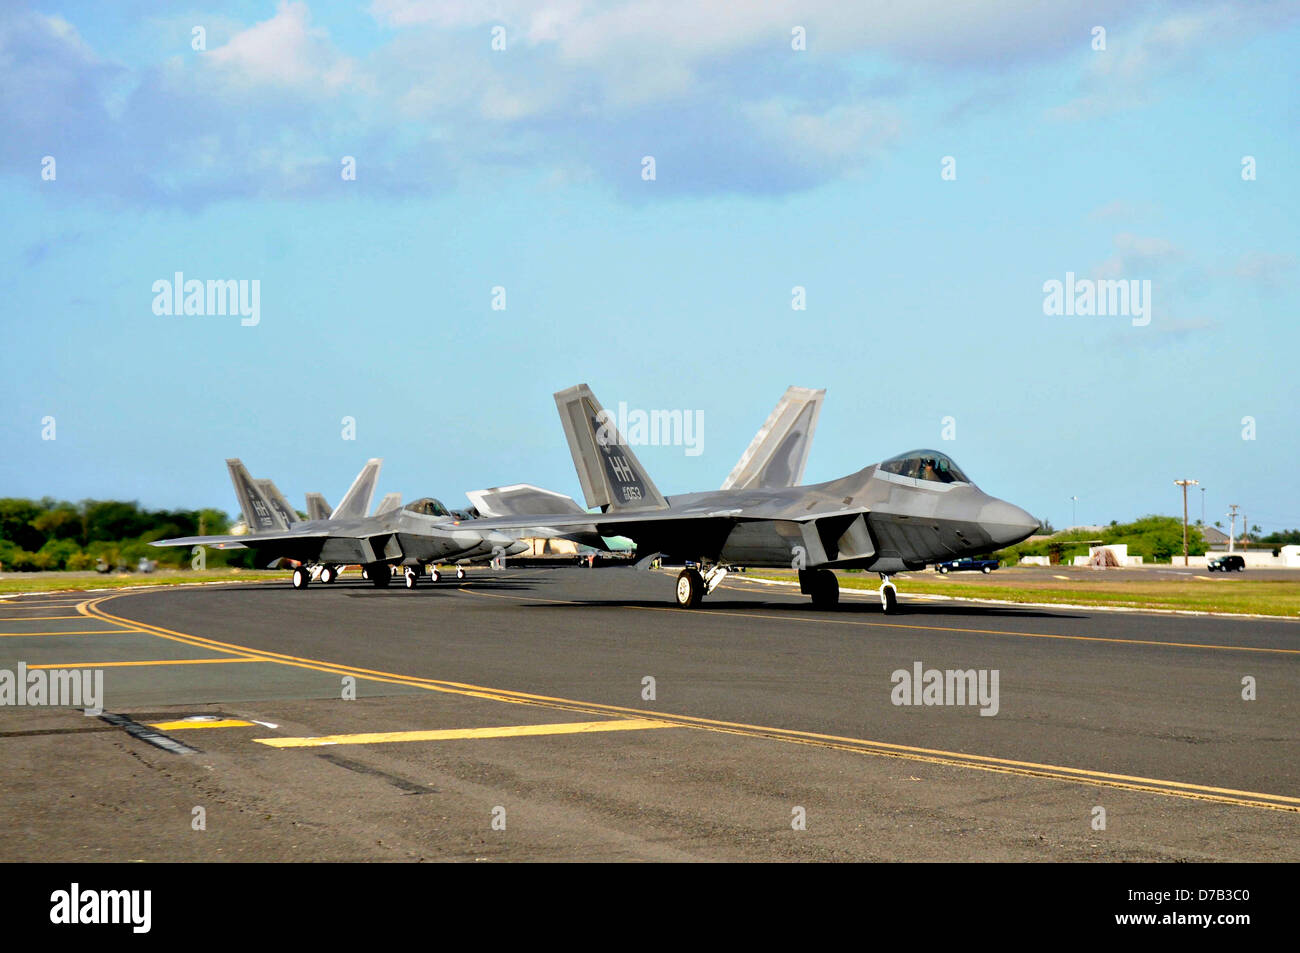 US Air Force F-22 Raptor stealth fighter aircraft taxi to takes off April 6, 2013 at Joint Base Pearl Harbor-Hickam, Hawaii. Stock Photo